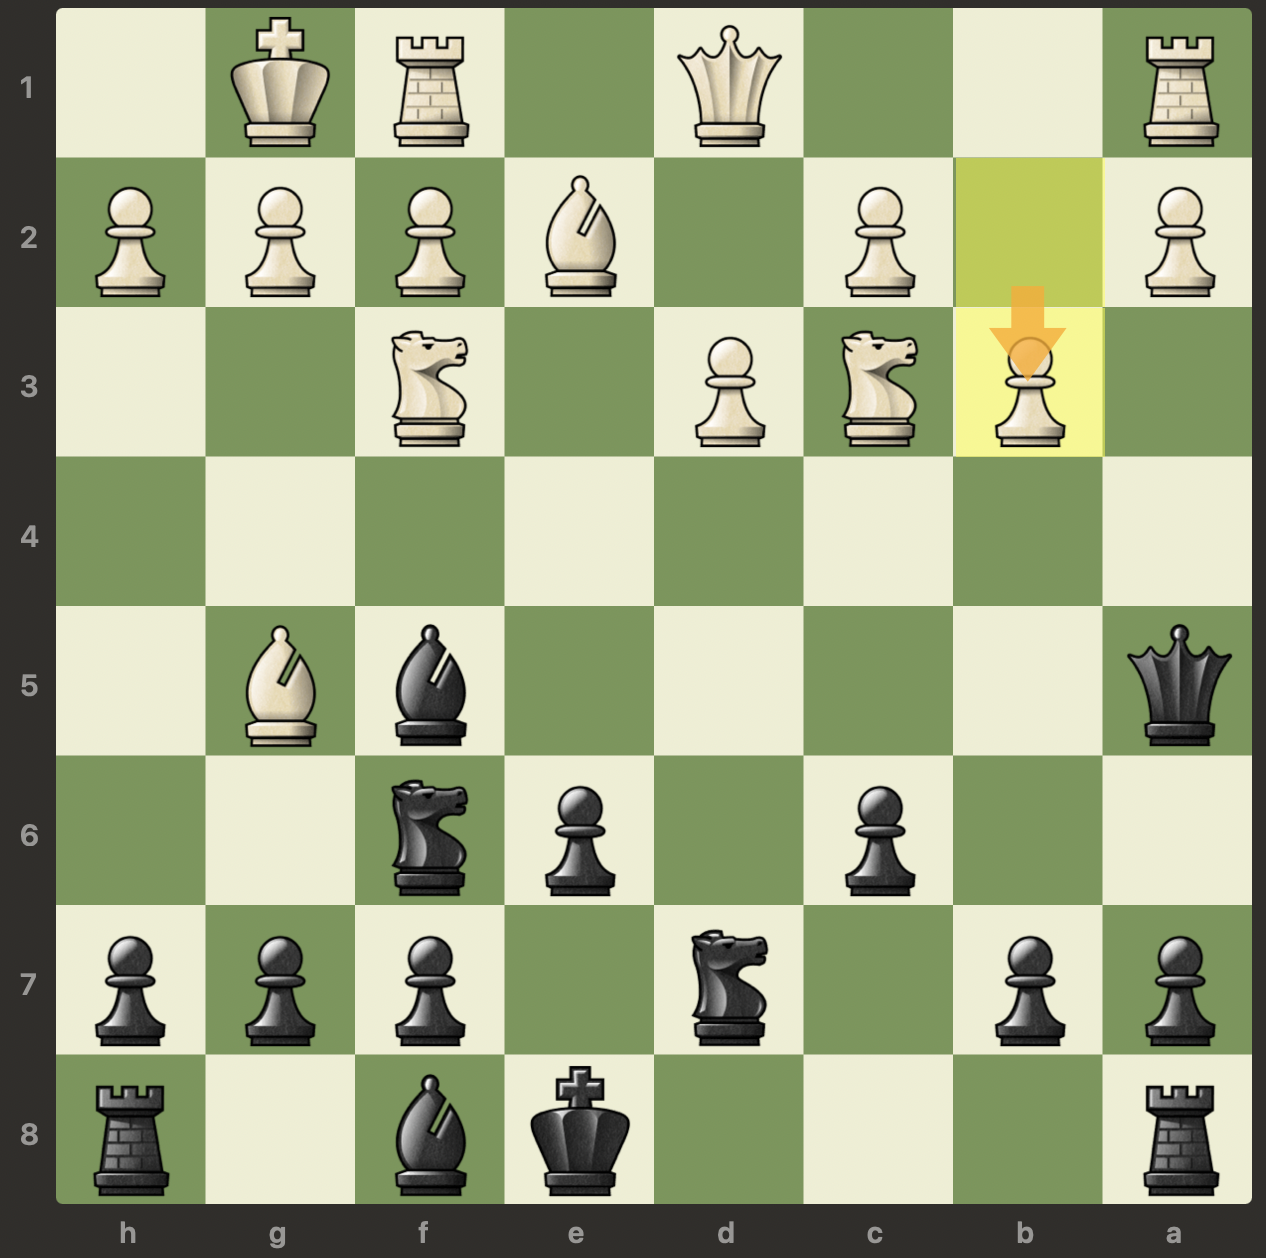 What is the best move here?